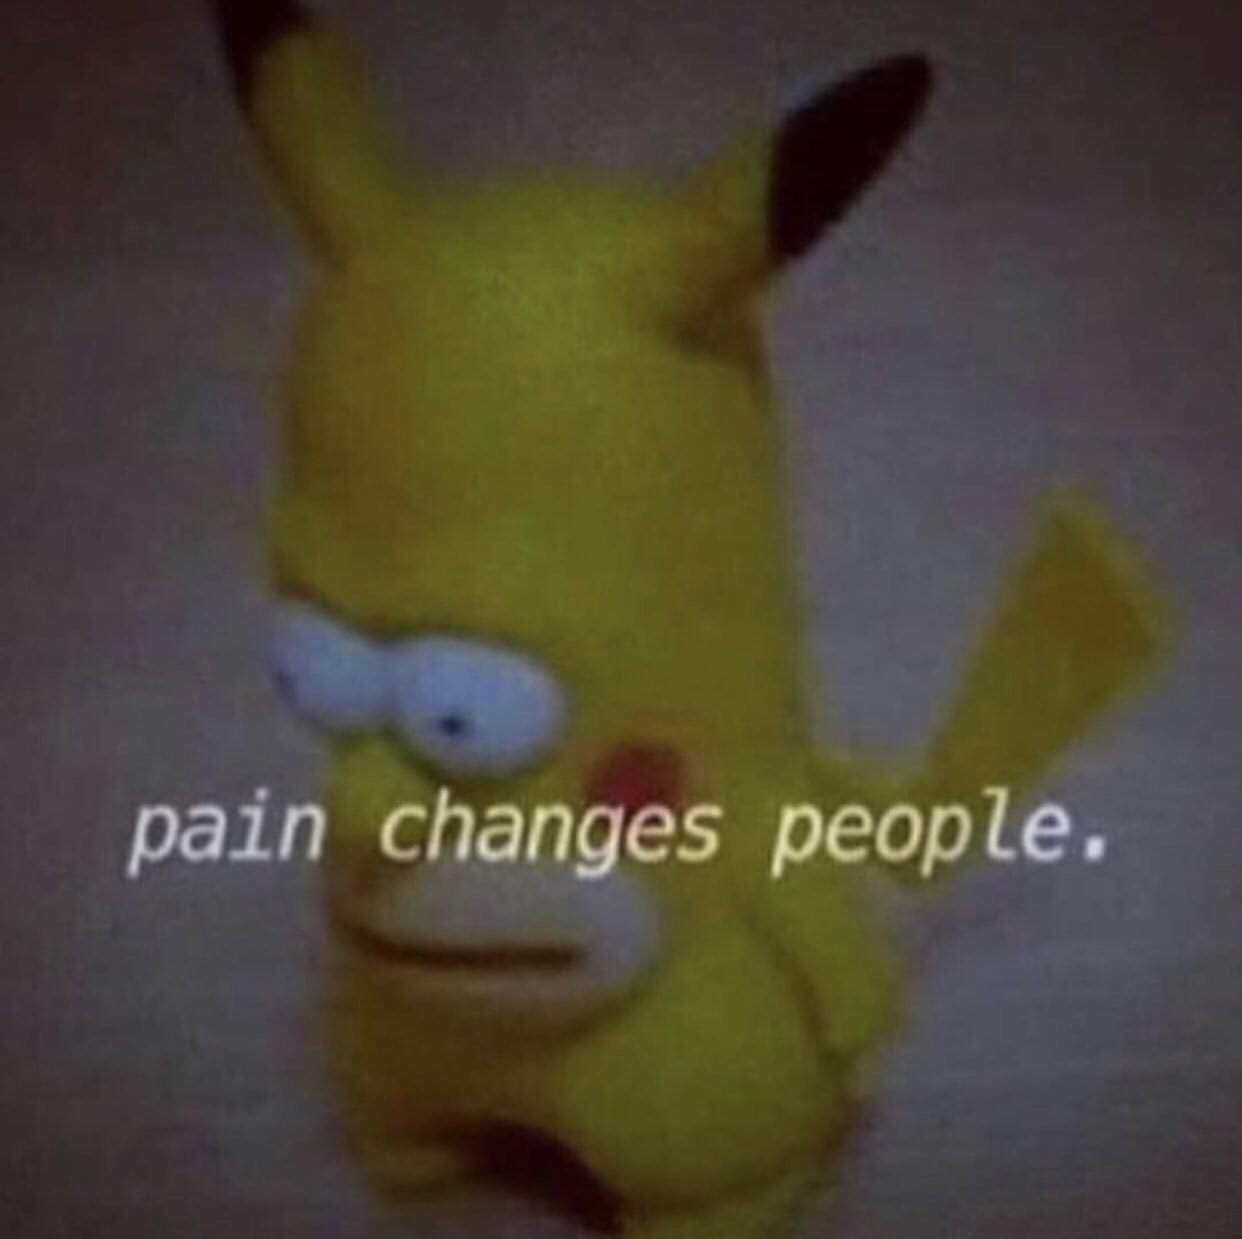 Depression meme - stuffed toy - pain changes people.